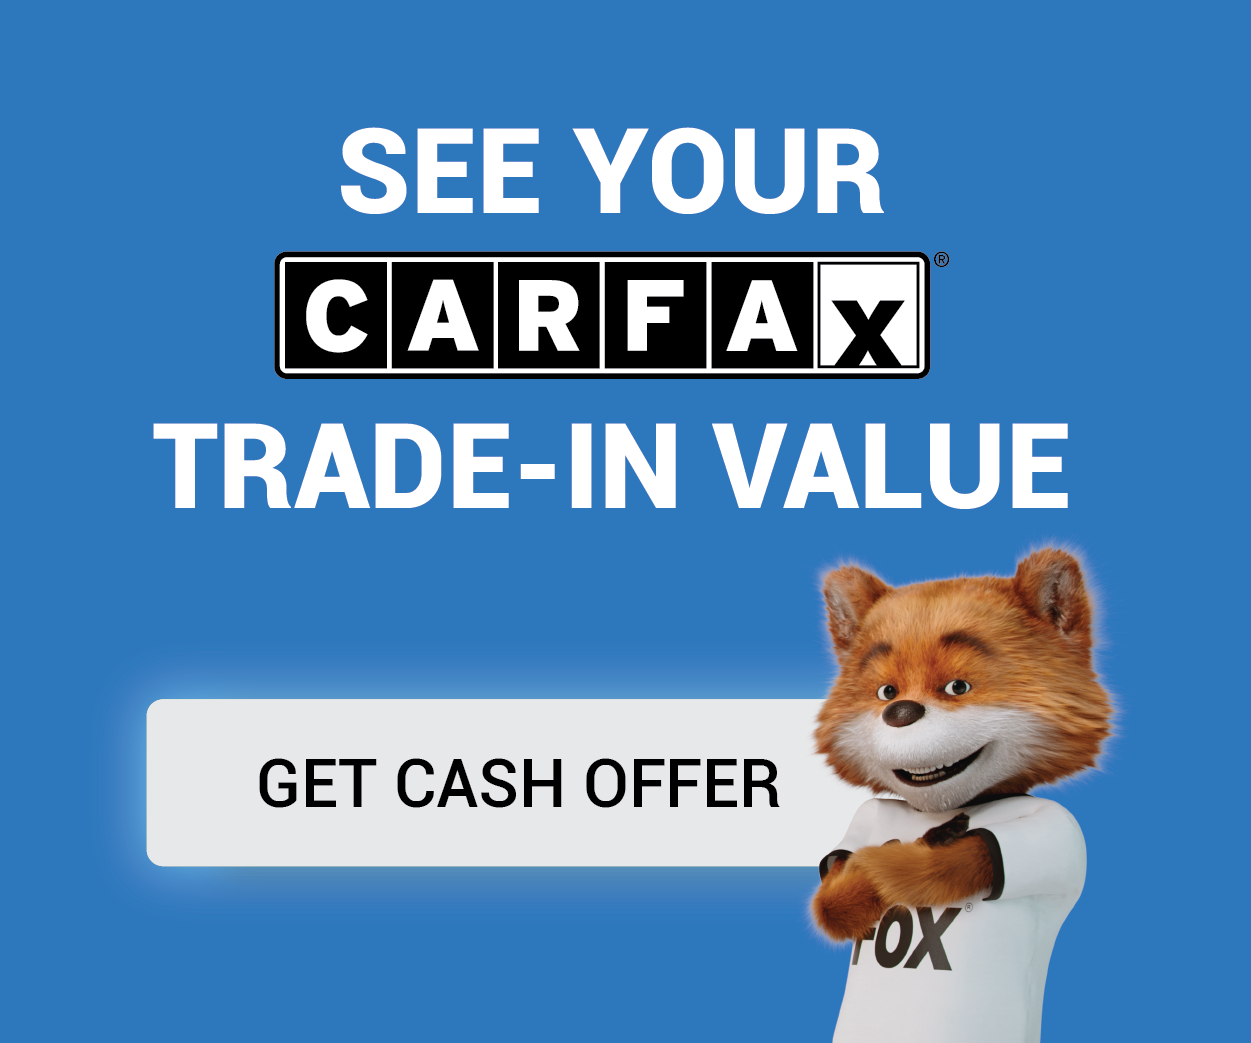 Carfax Trade-in value